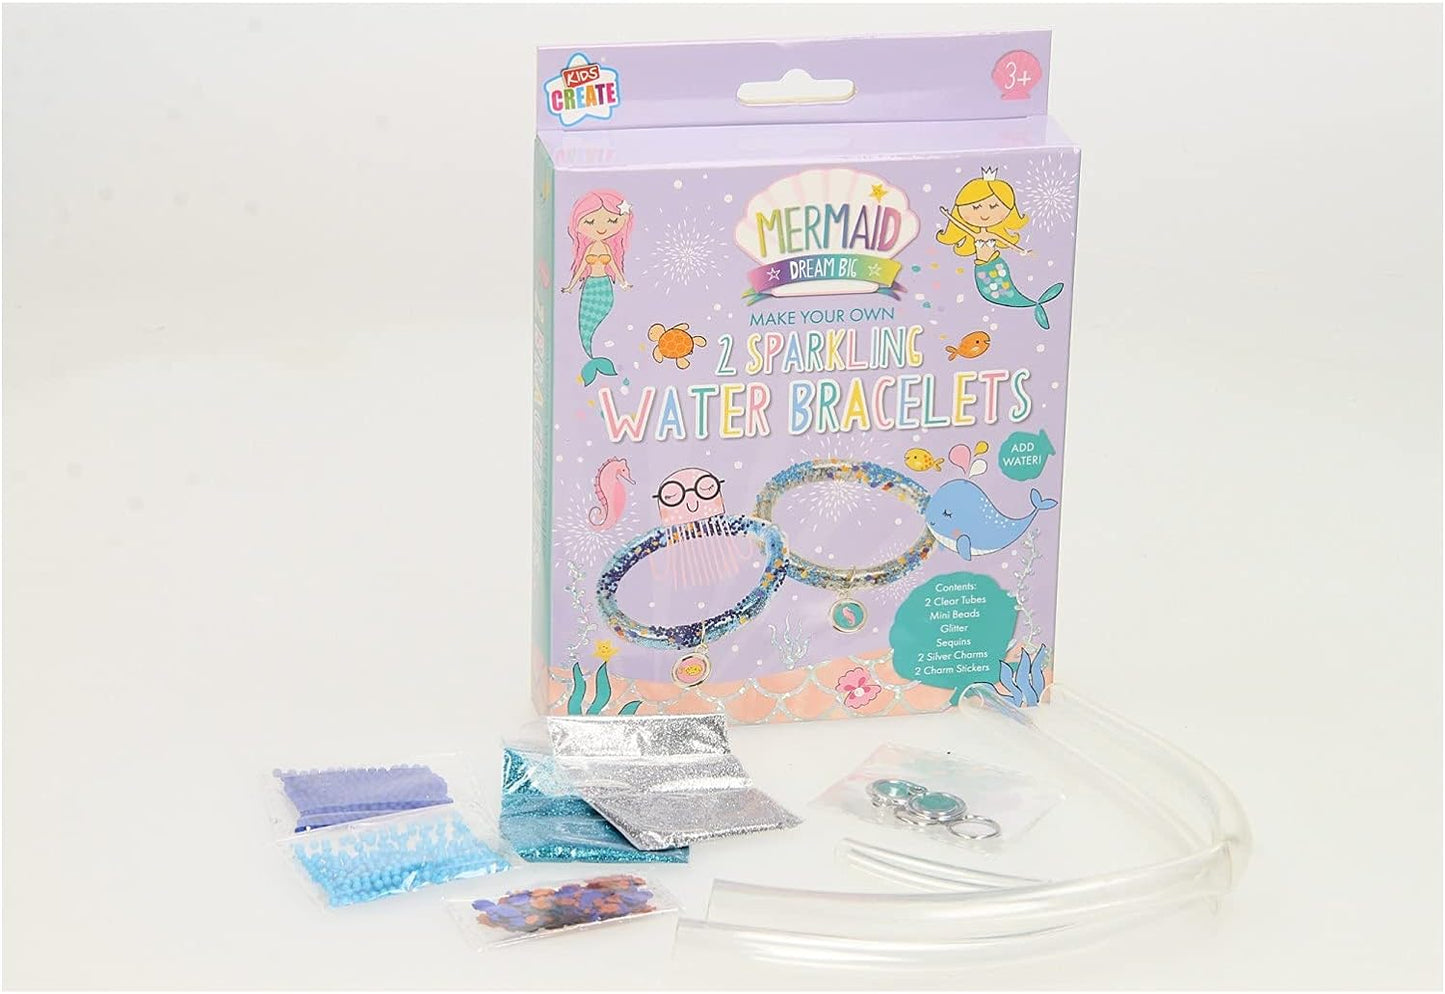 Make Your Own 2 Mermaid Sparkling Water Bracelets